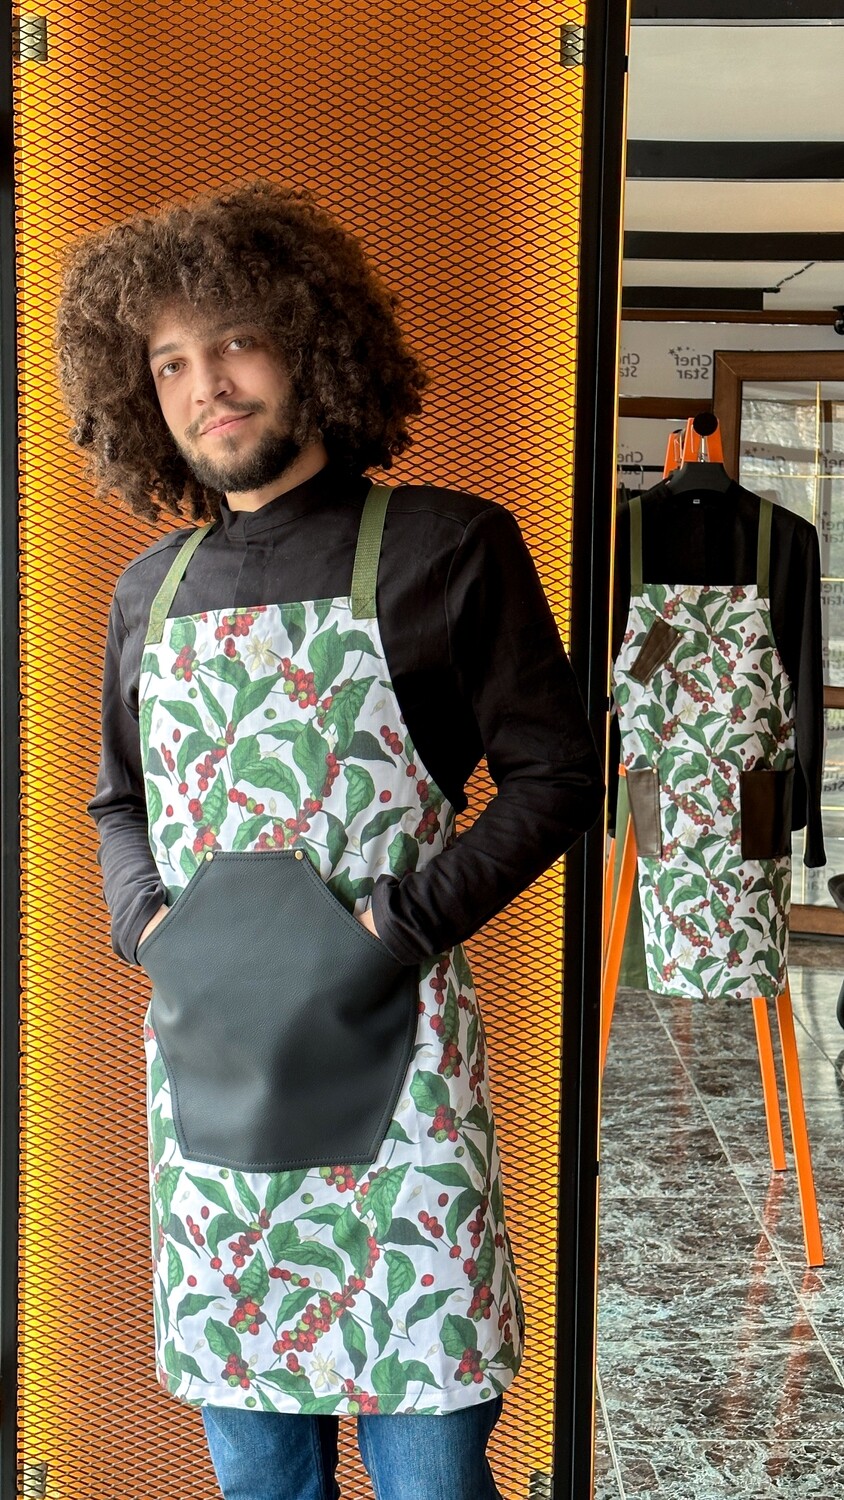 Coffee Wow Apron, by chefstarfamily